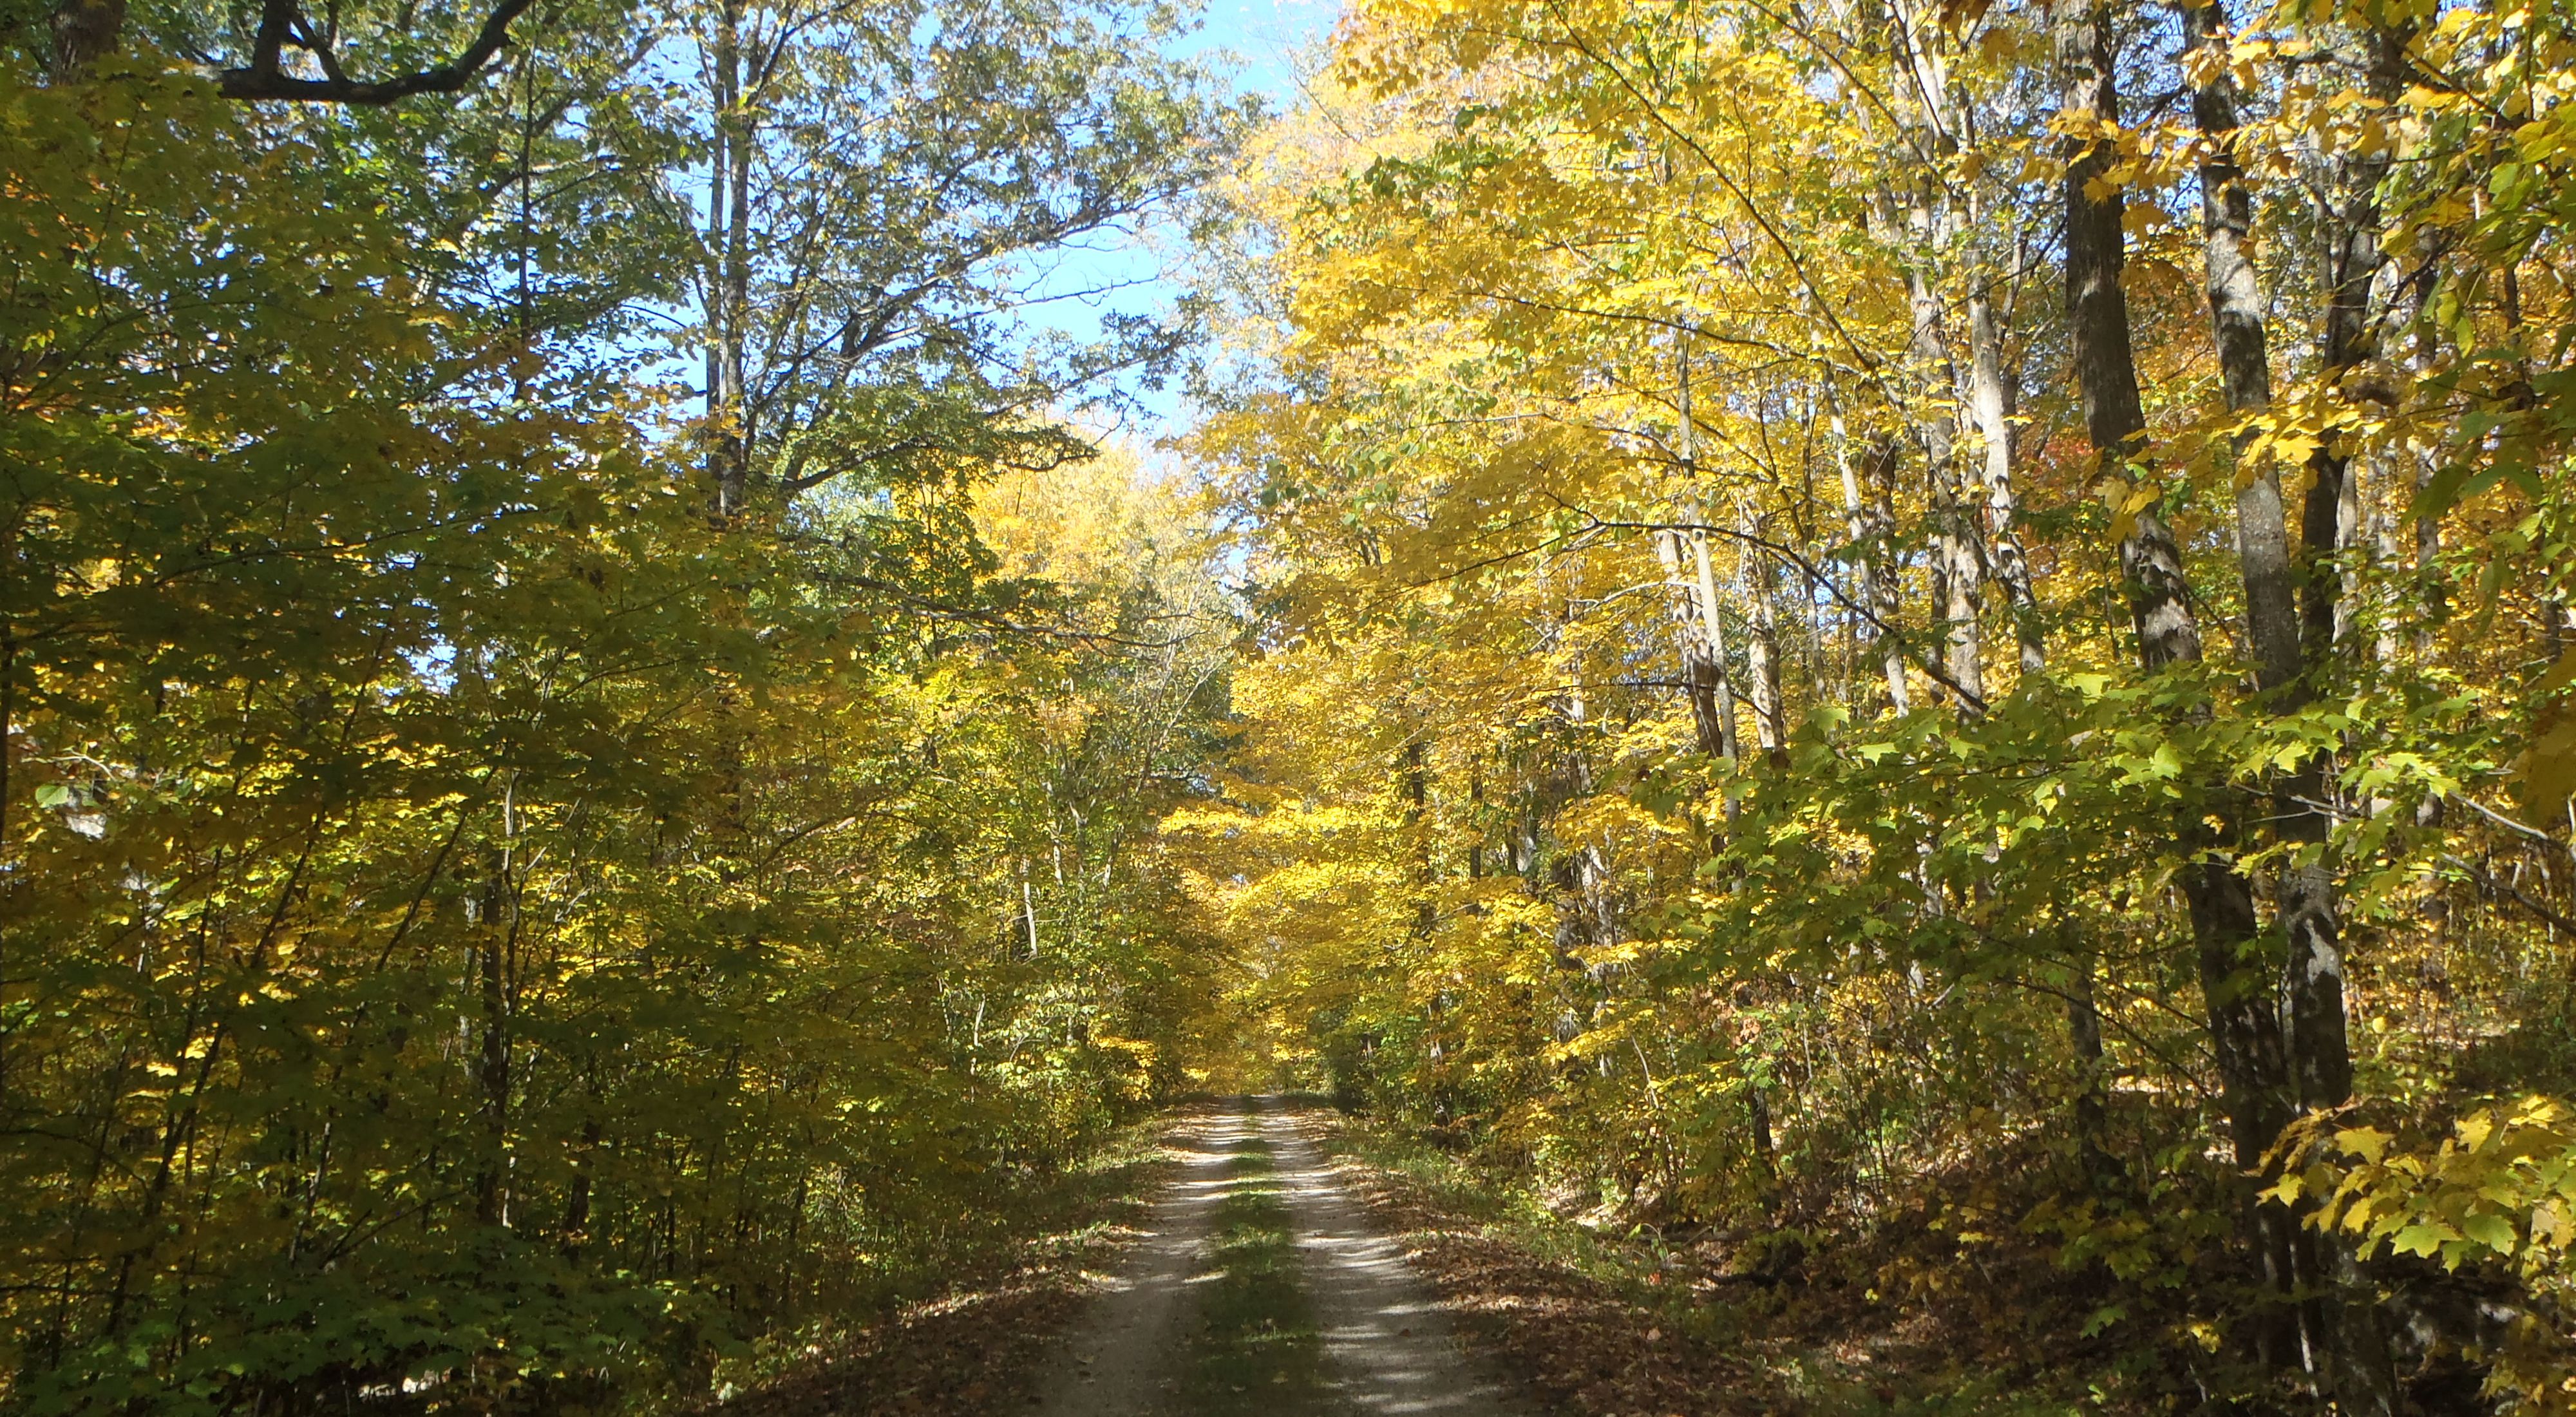 Unpaved road winds through a forest ablaze with fall color in Wisconsin.